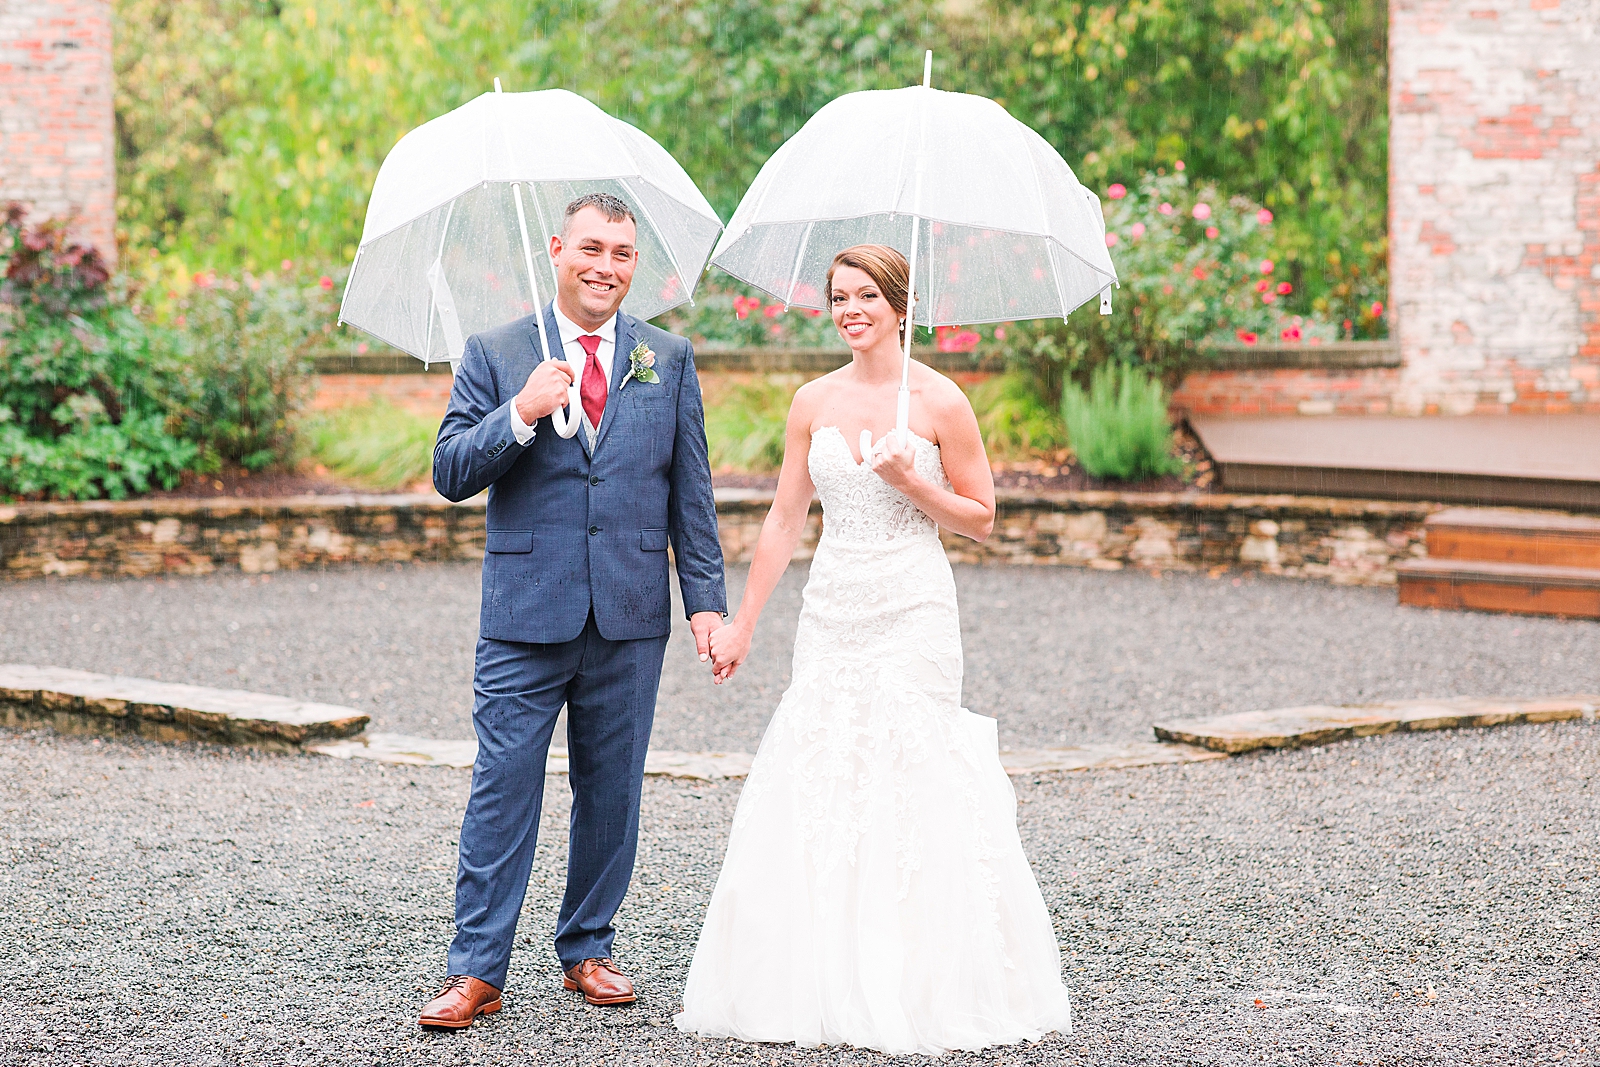 The Hackney Warehouse Bride and Groom Smiling at Camera Holding Umbrellas in Rain Photo